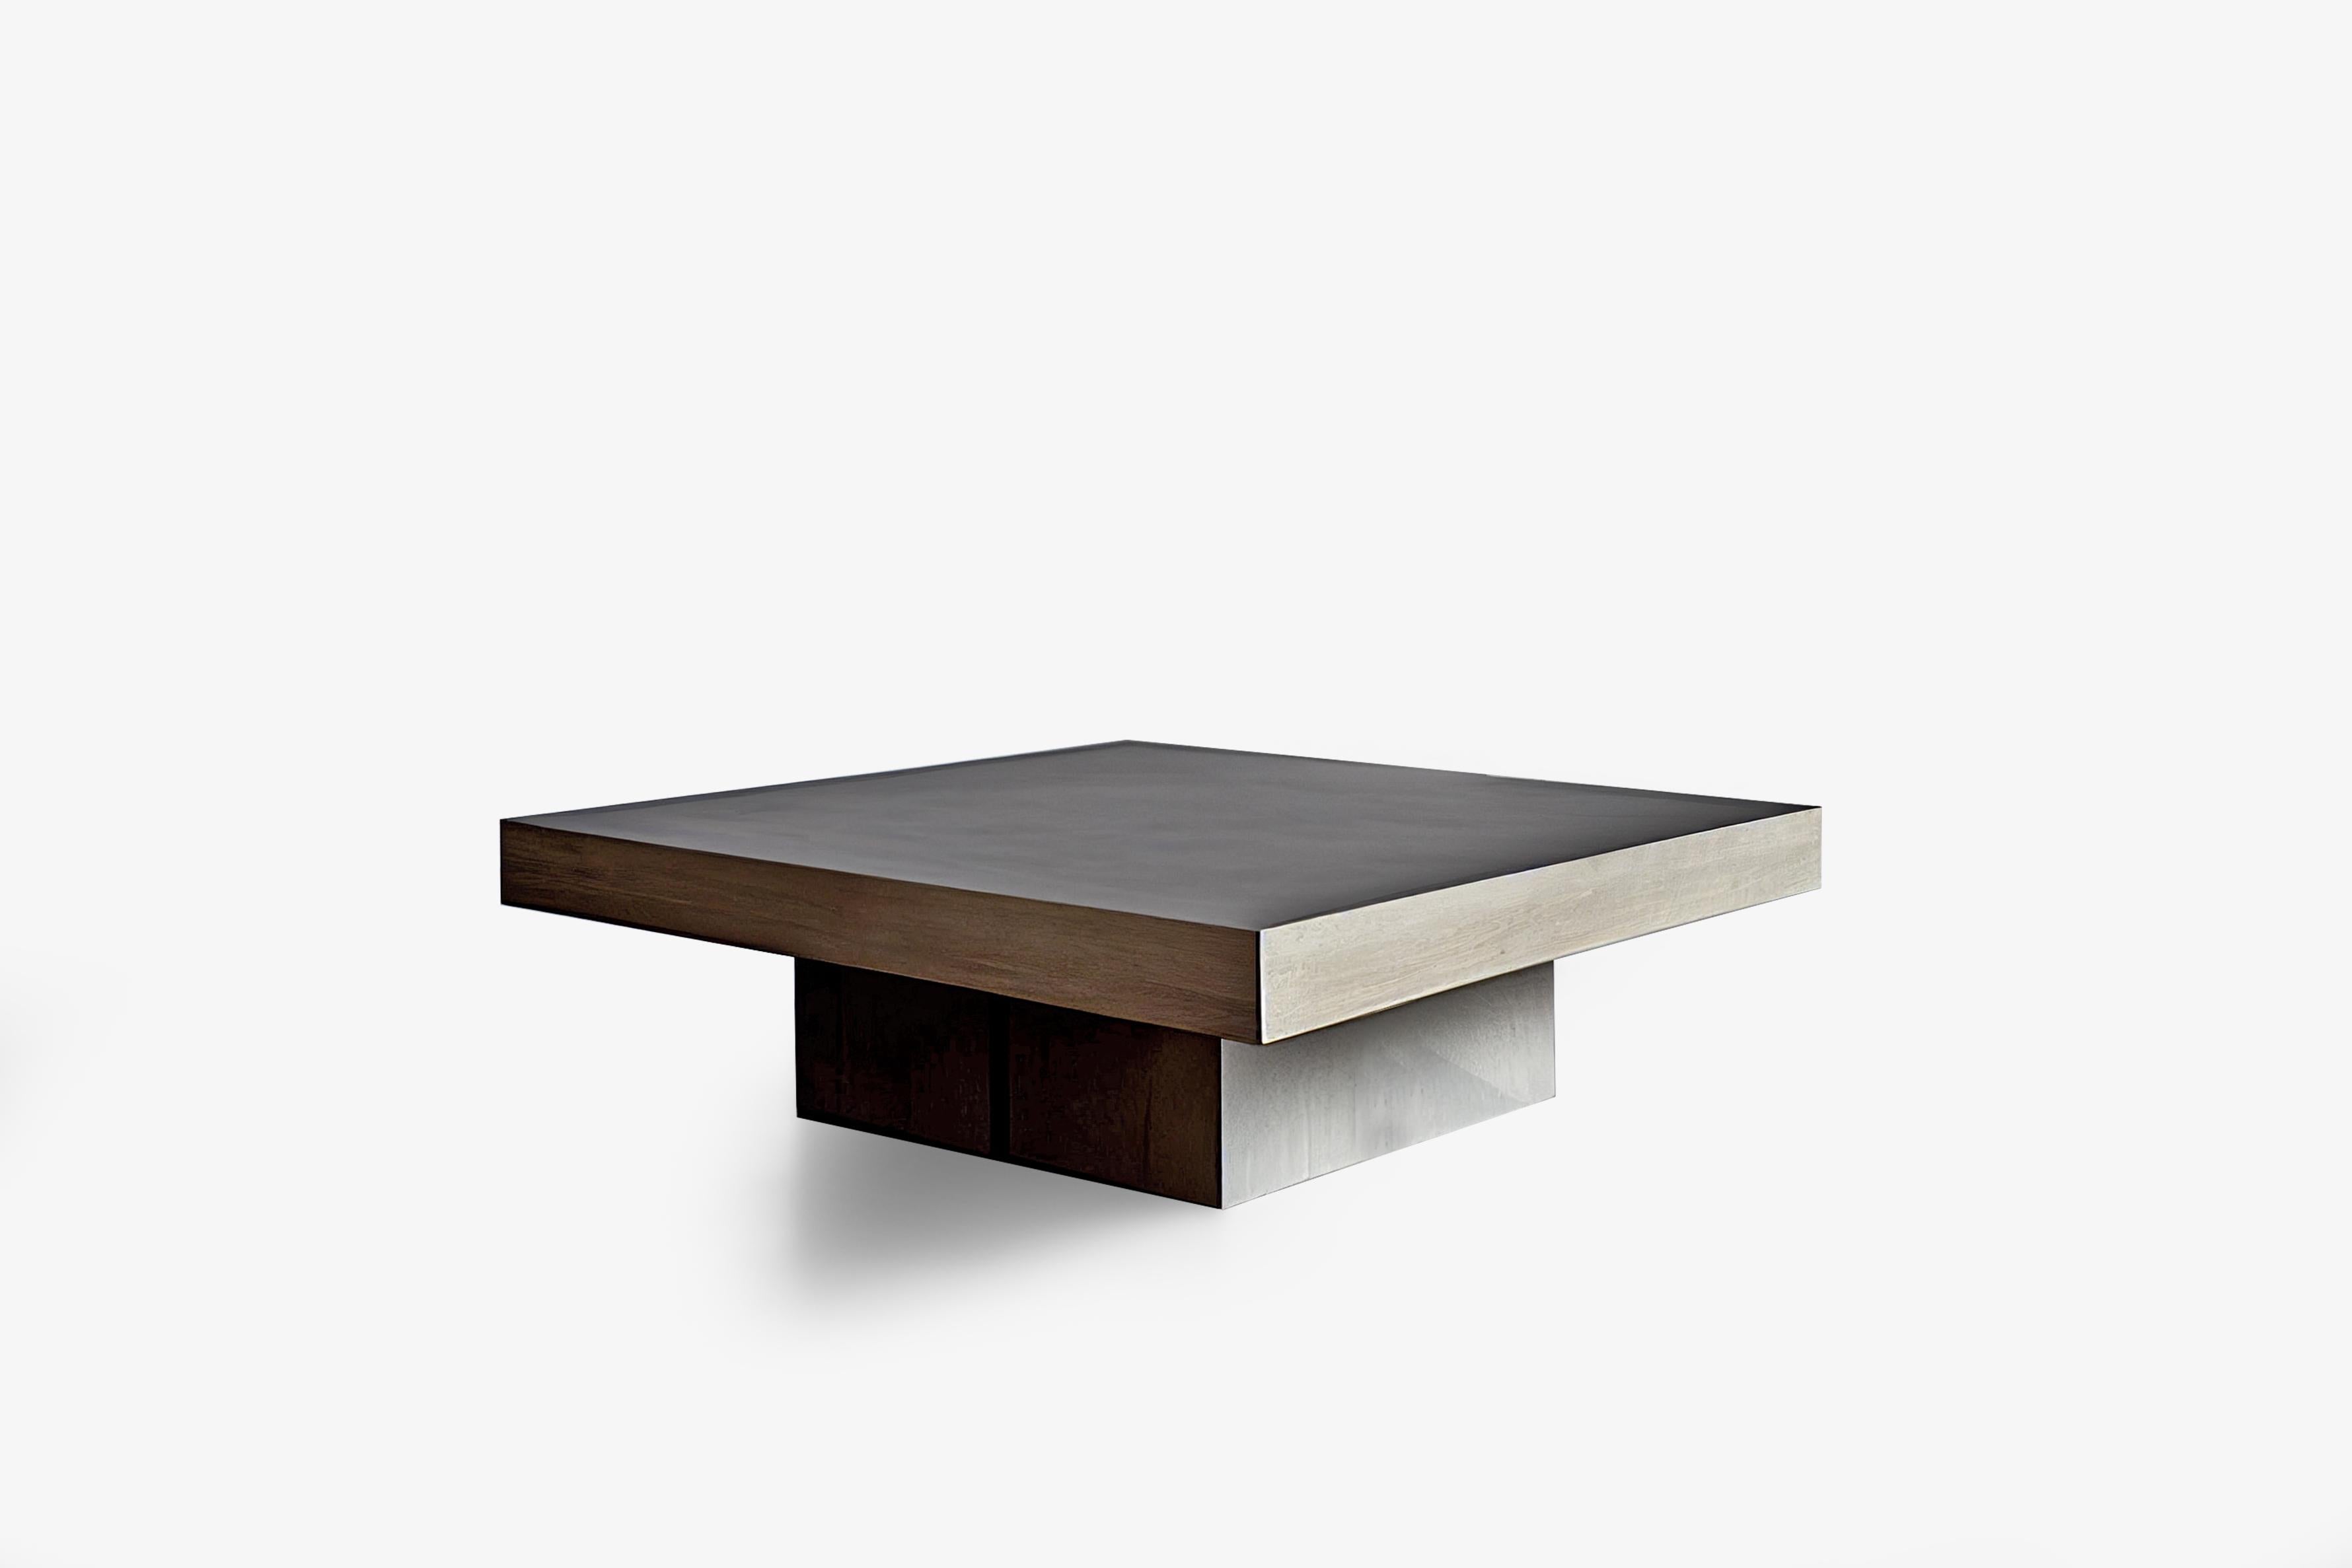 Mexican Square Coffee Table Made with Beautiful Black and Grey Veneer Wood by Nono For Sale